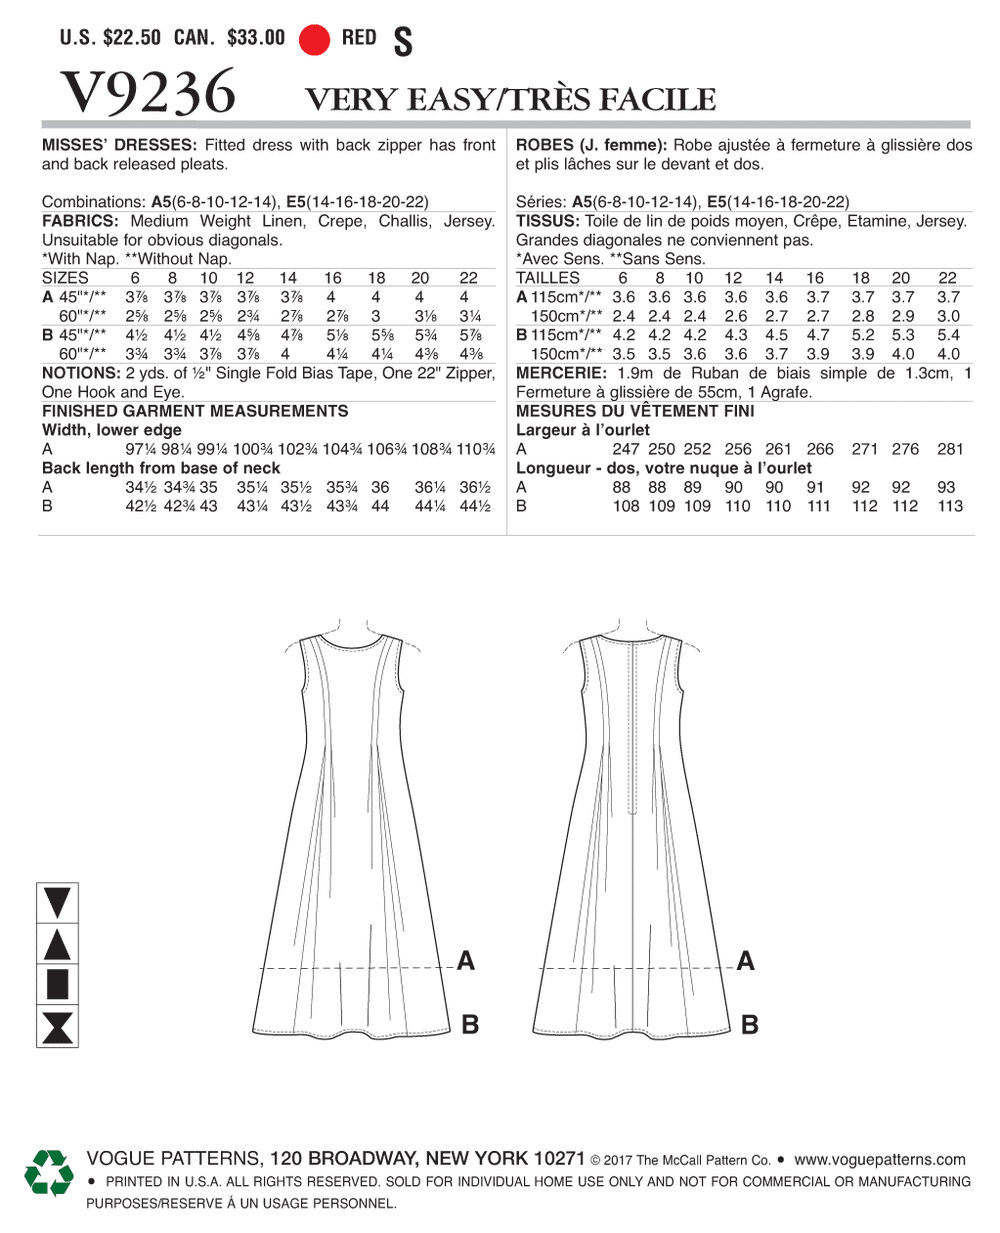 Vogue Patterns MISSES' RELEASED-PLEAT FIT-AND-FLARE DRESSES 9236 pattern  review by petitelea